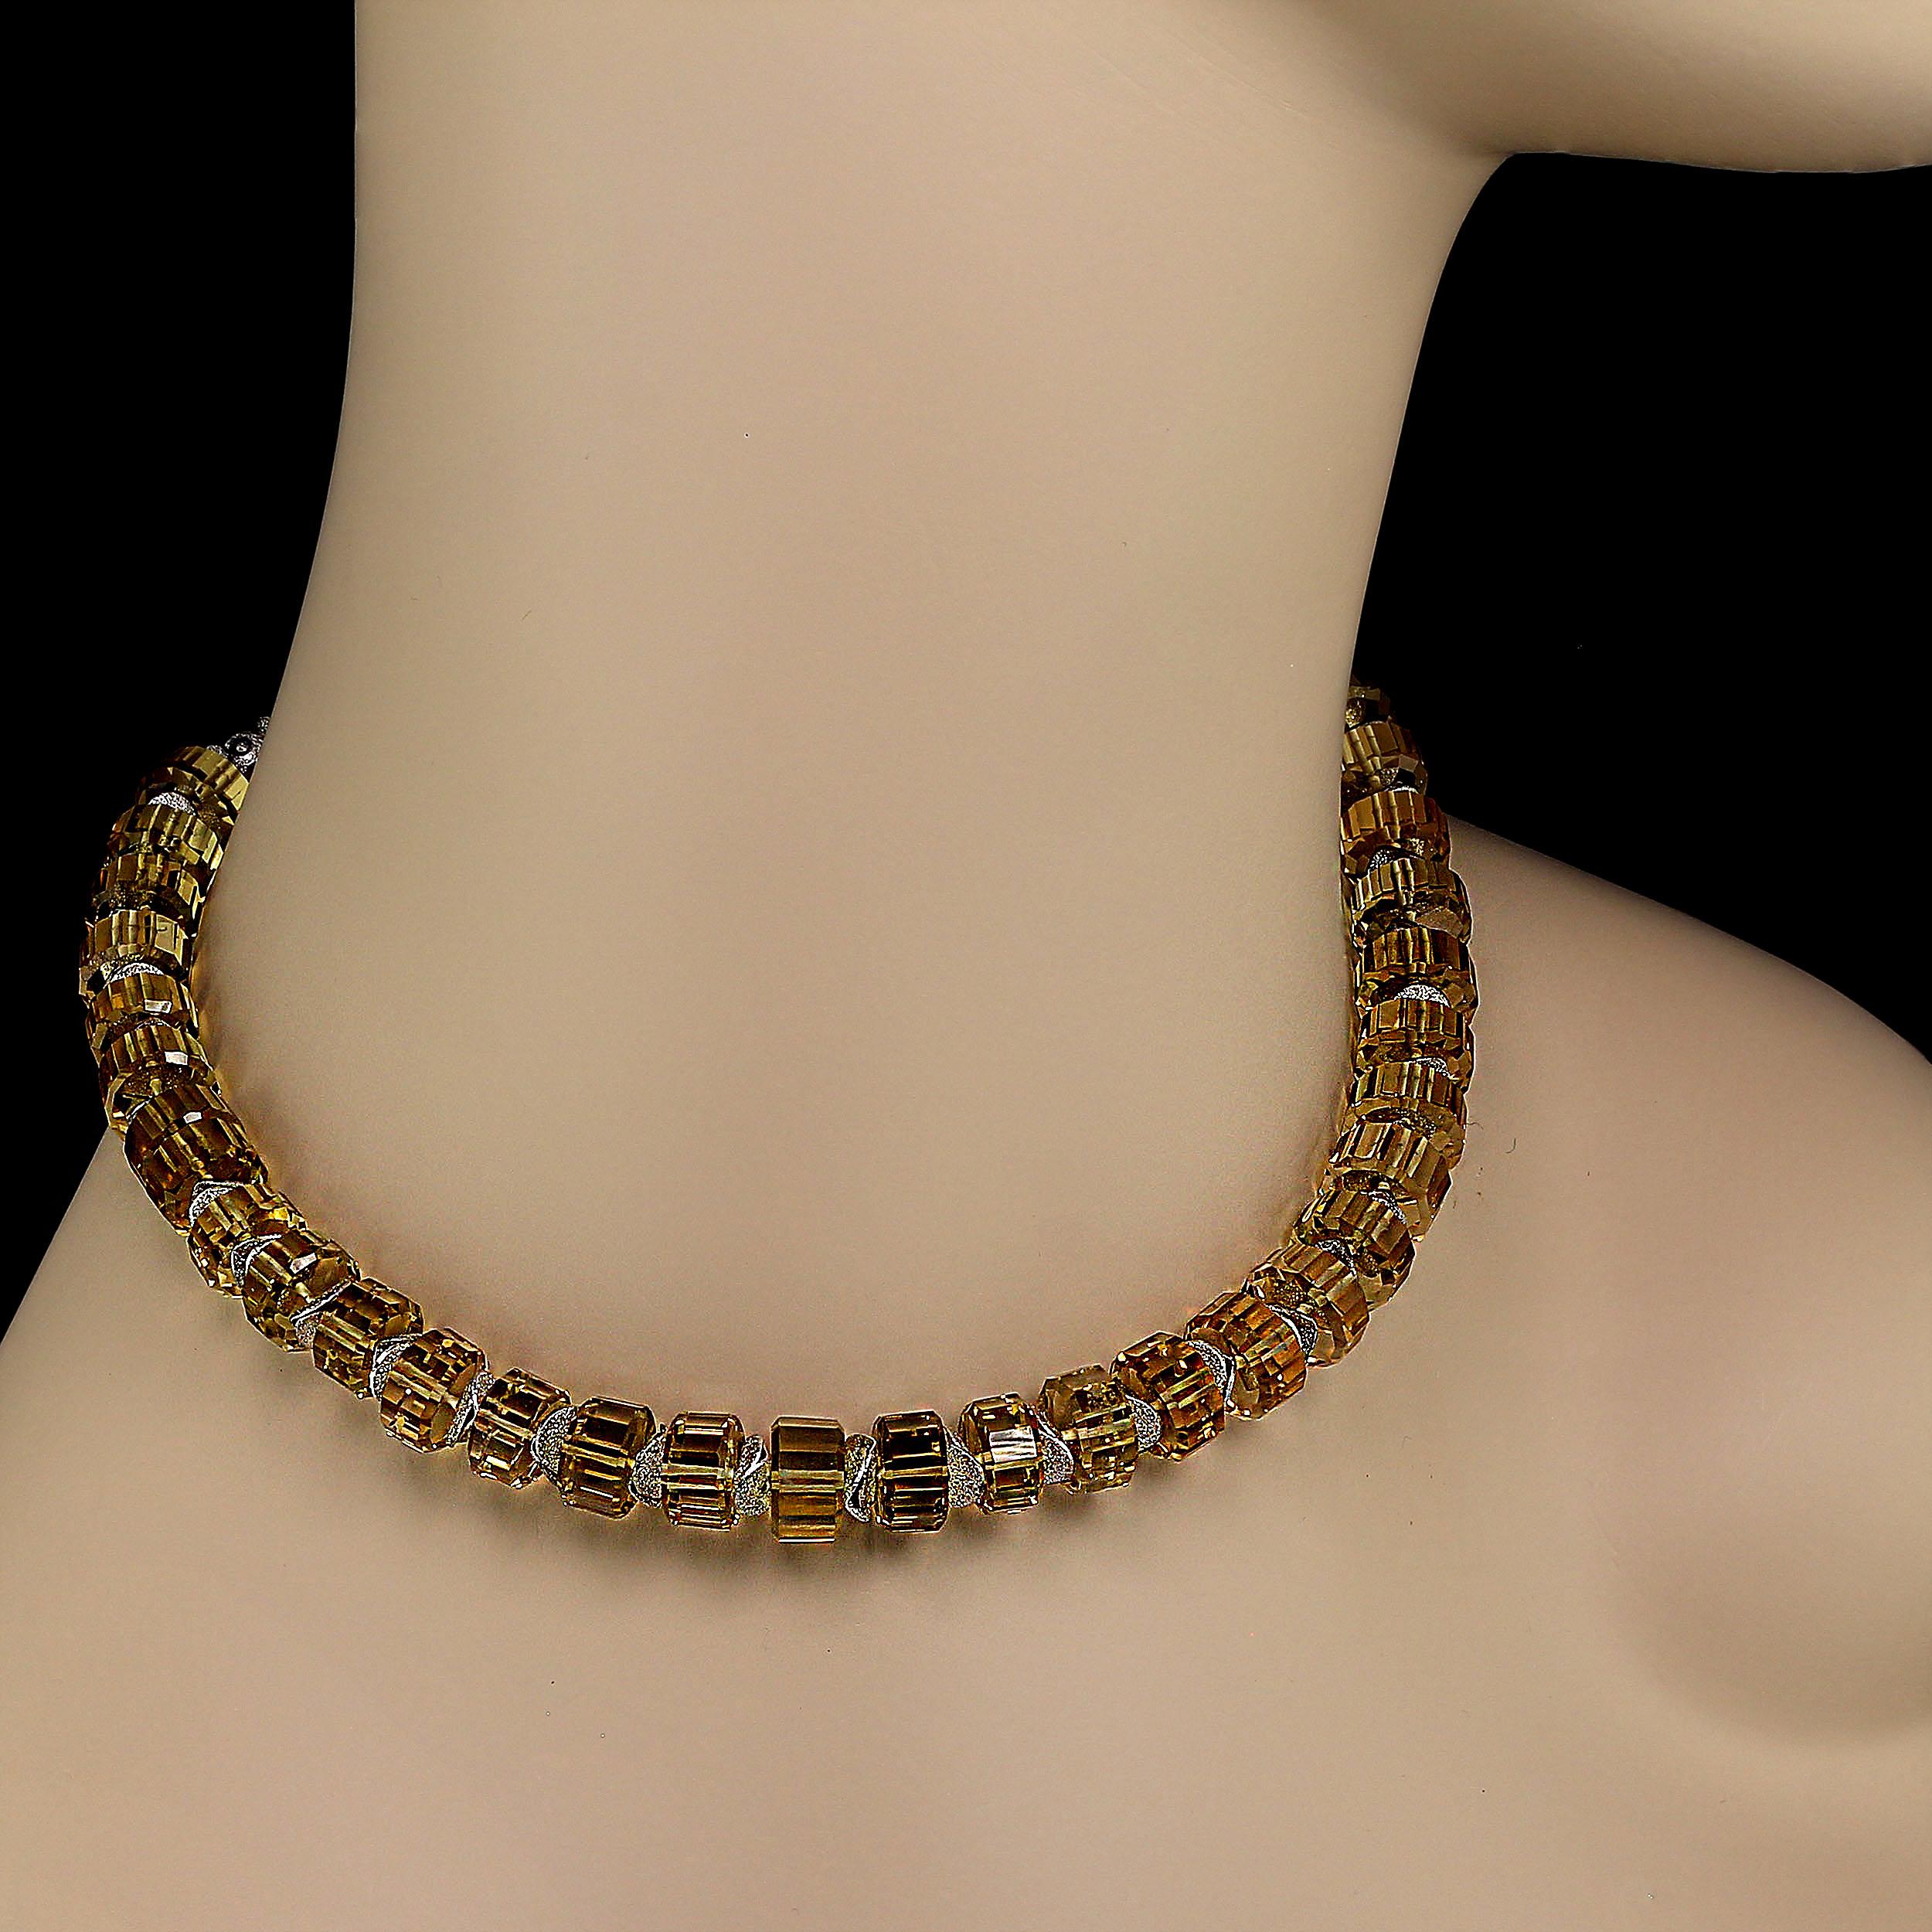 Custom made choker necklace of beautifully Fancy Cut Citrine Rondelles, 10mm, accented with frosted silver tone flutters. These are gorgeous genuine gemstones strung together to create a bold choker. The Turkish Sterling Silver wreath toggle clasp